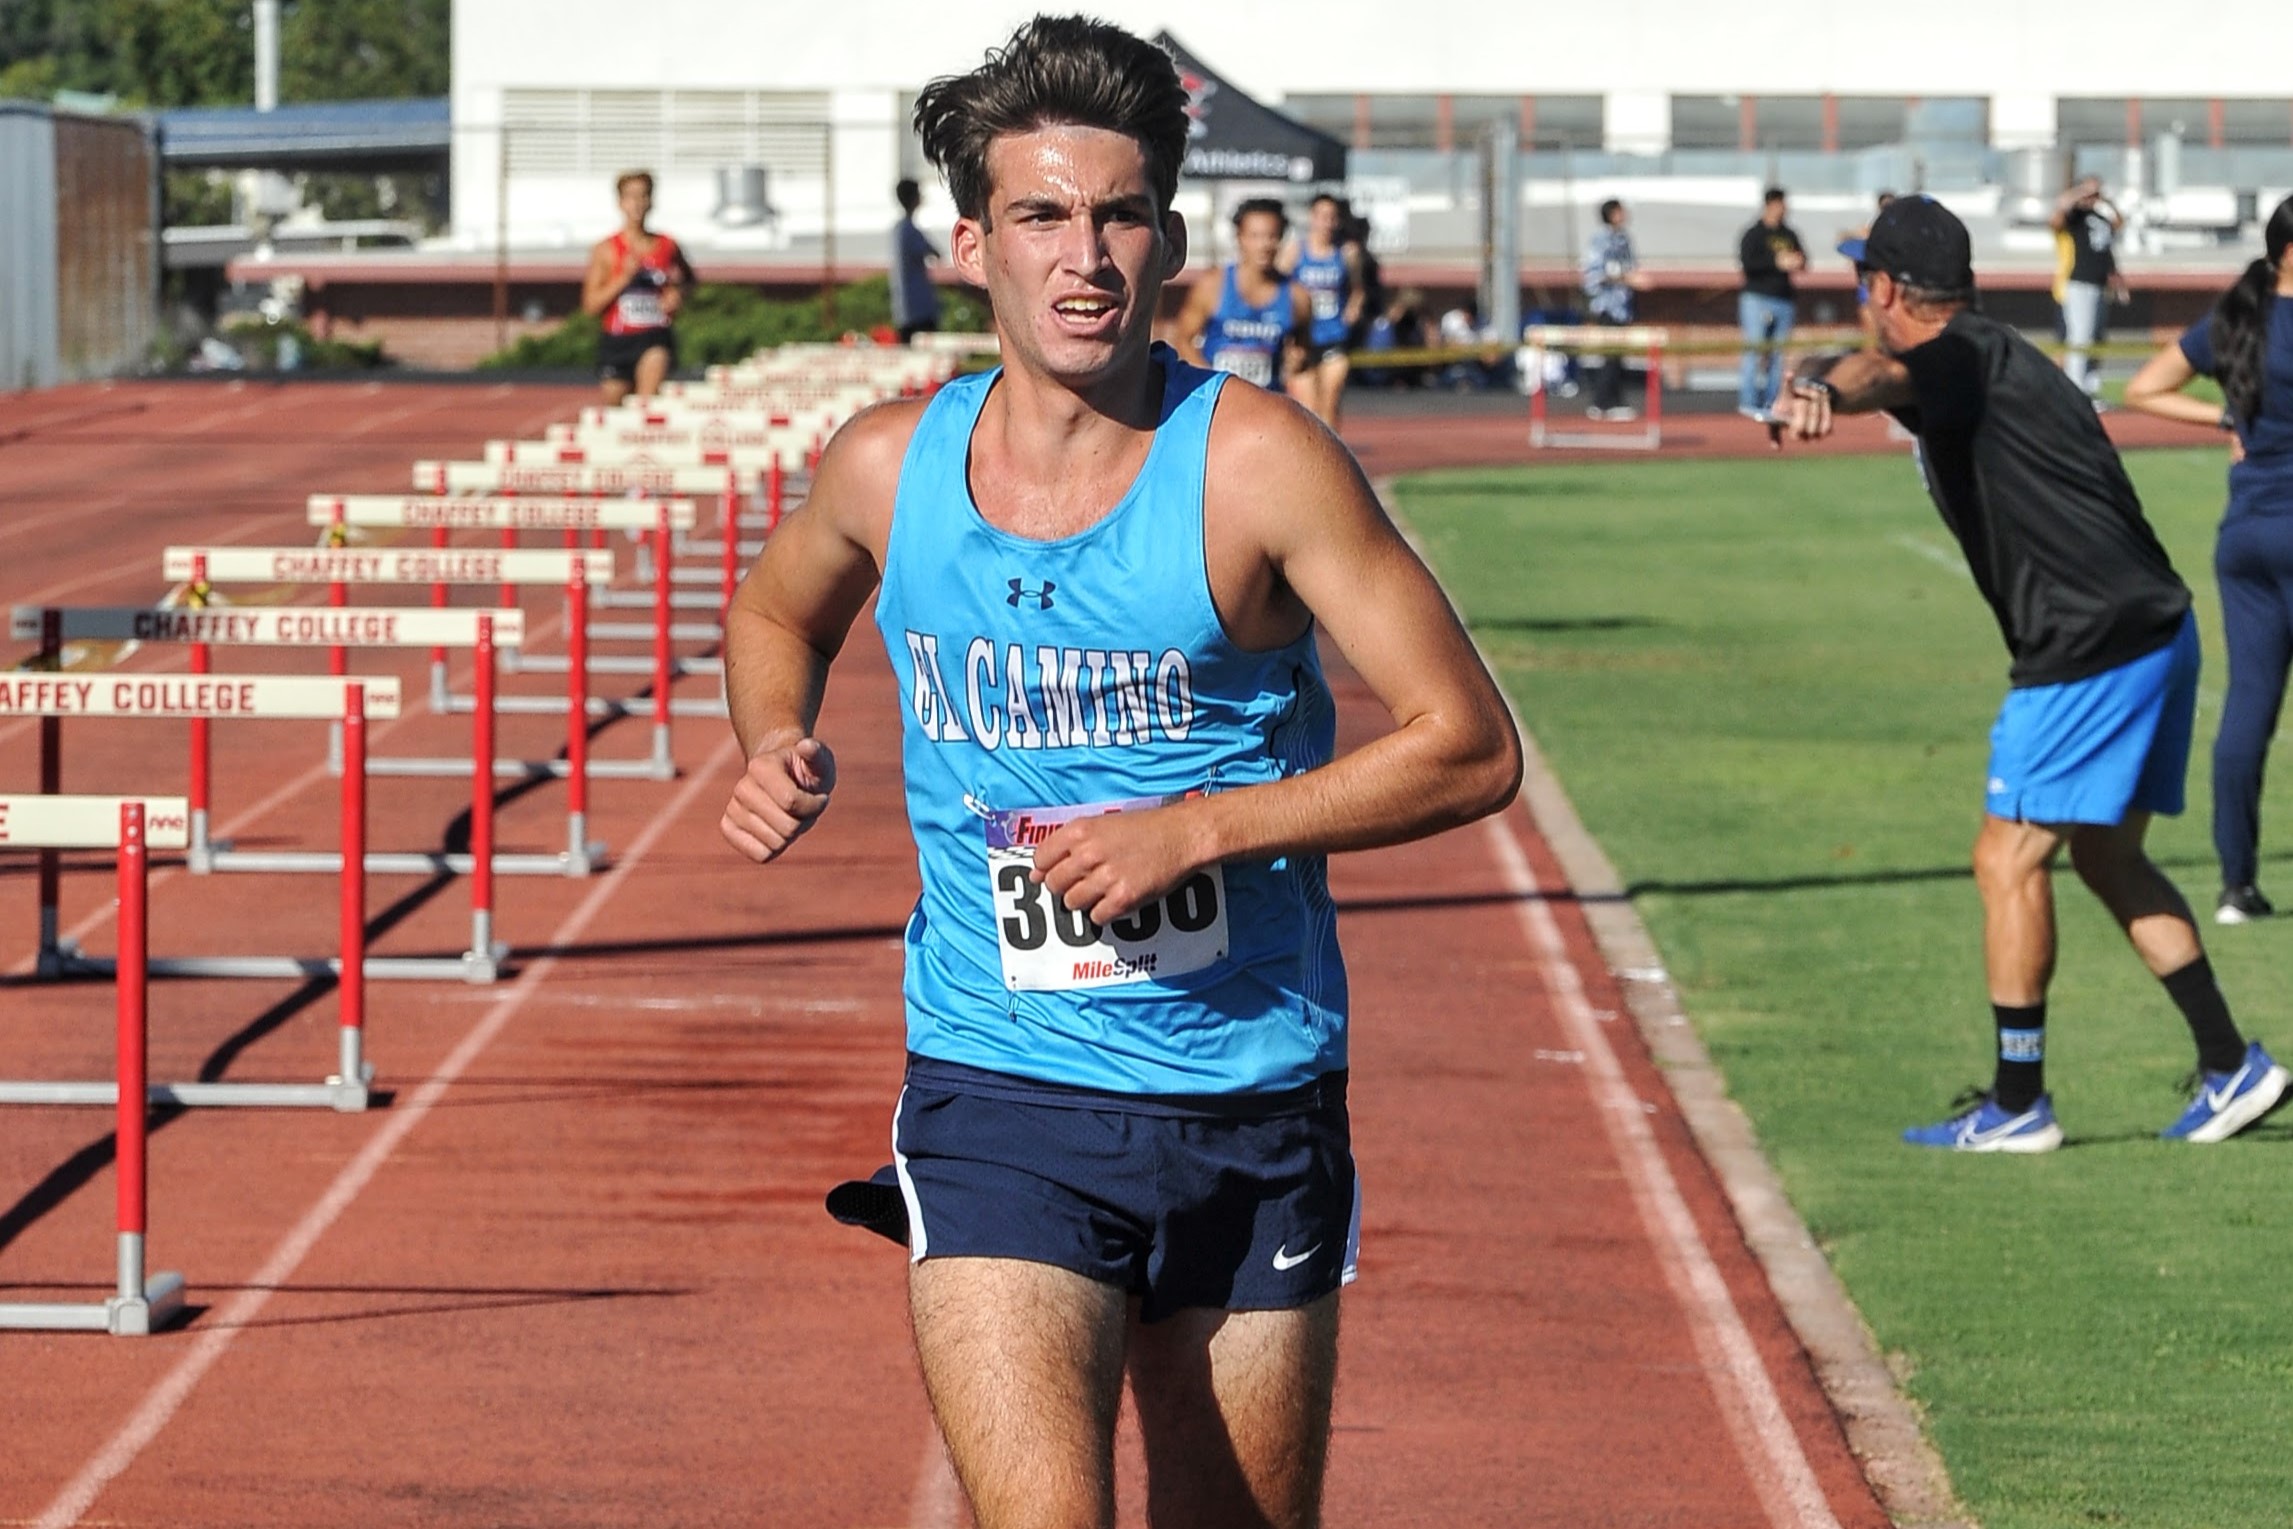 Cohen Wins as Cross Country Bags Pair of Team Runner-Up Finishes